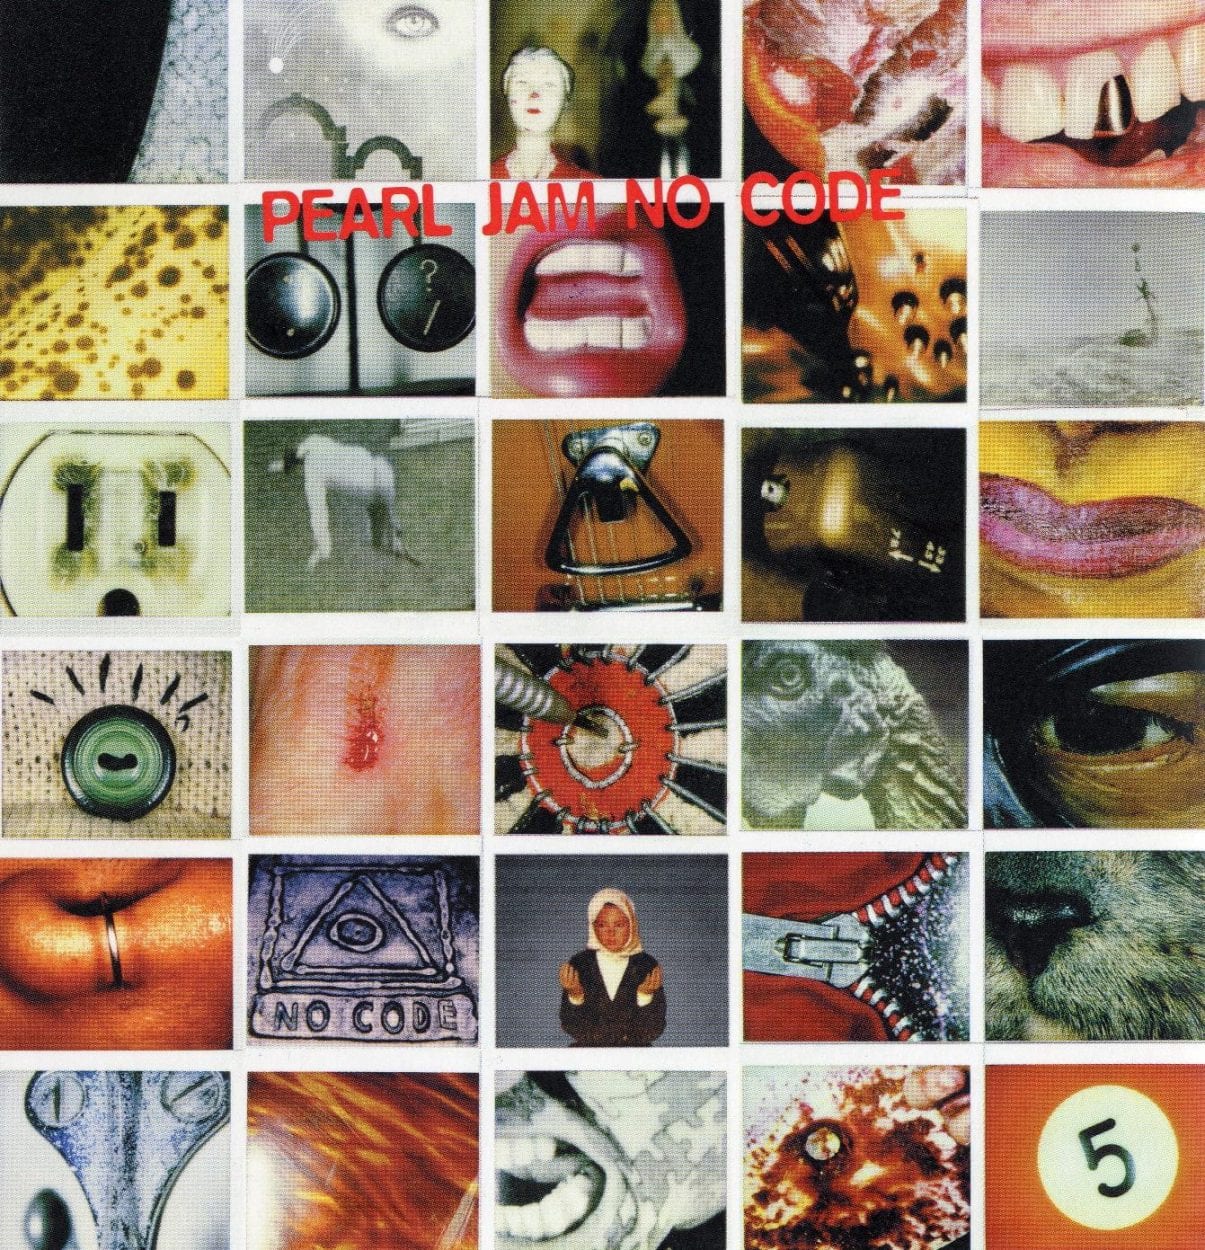 A six-by-five grid of small polaroid pictures, with Pearl Jam No Code written in red font.